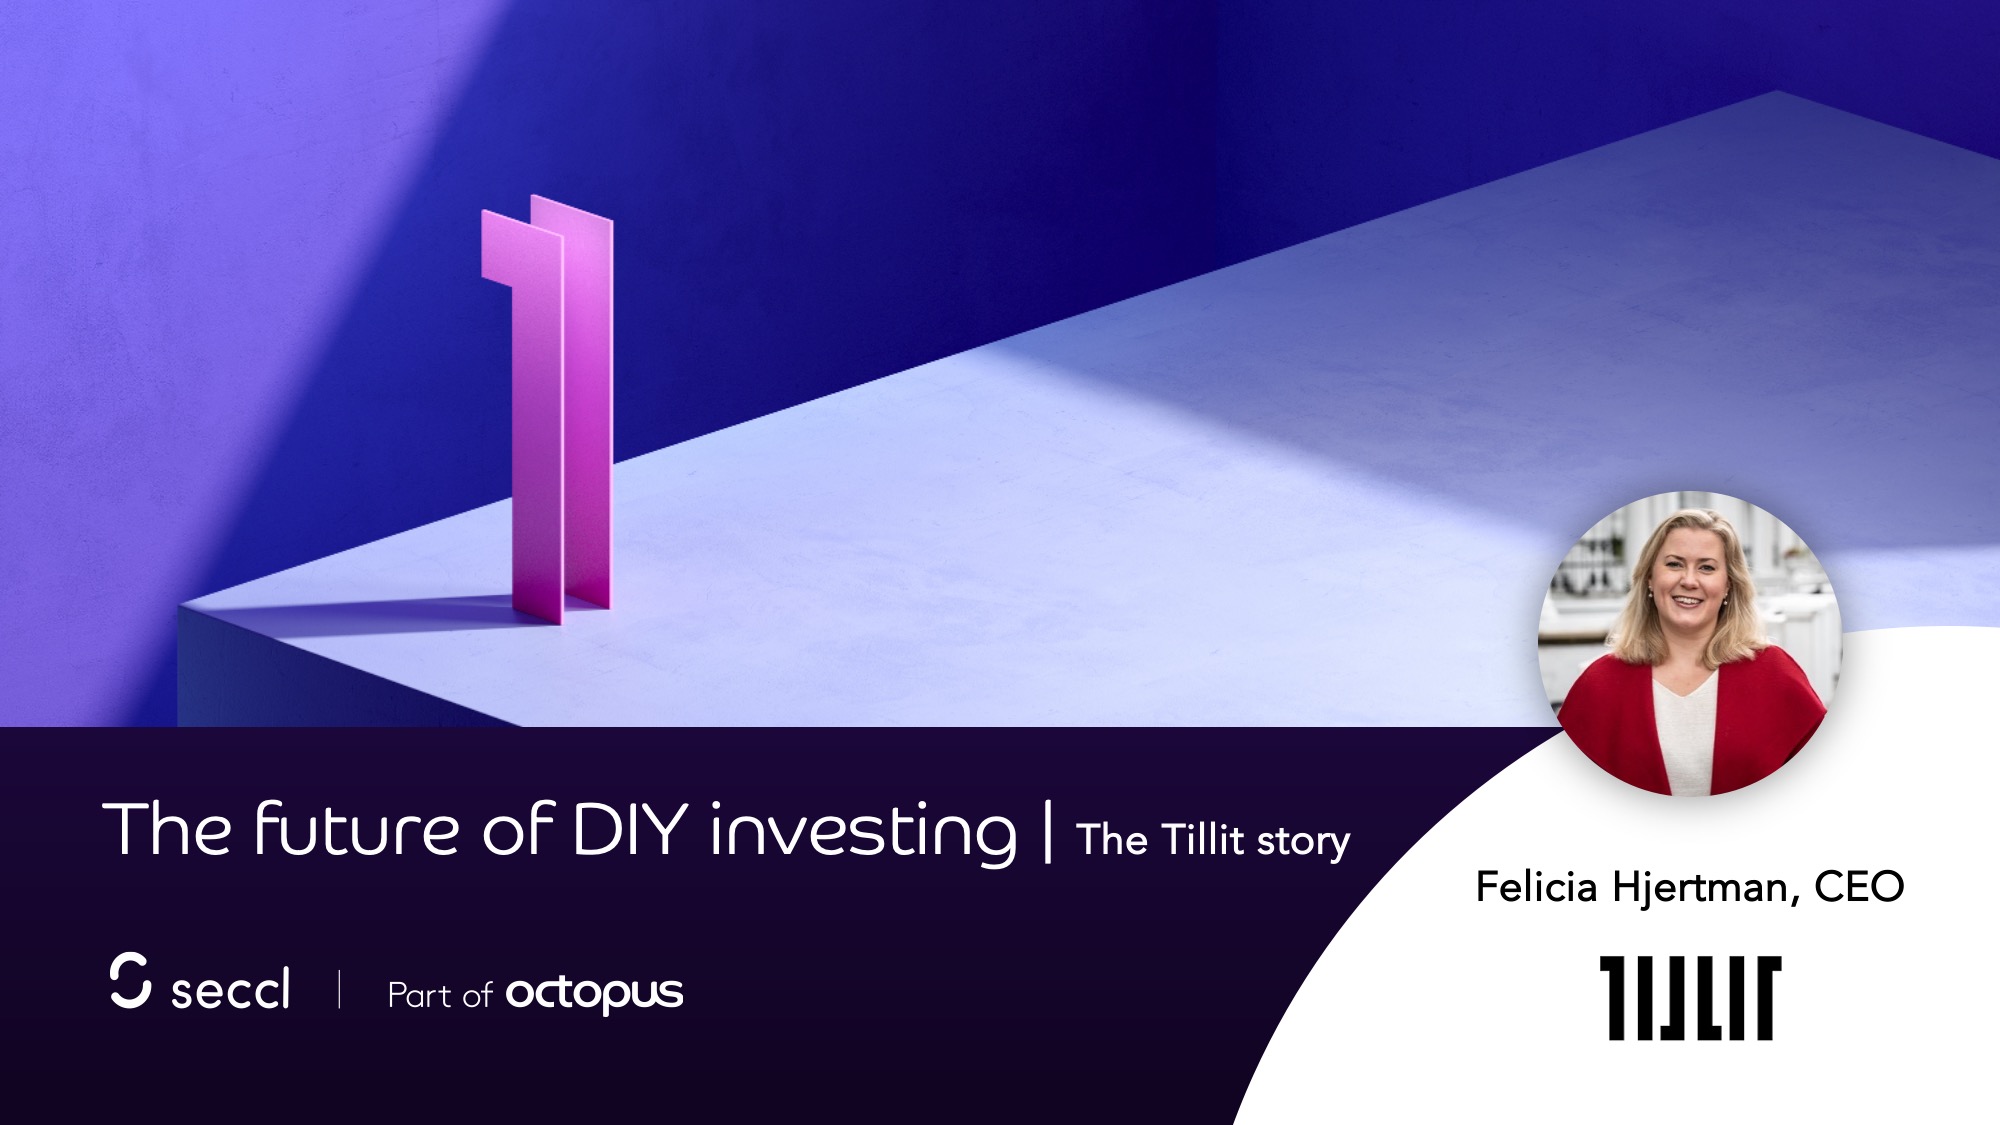 The future of DIY investing: the Tillit story